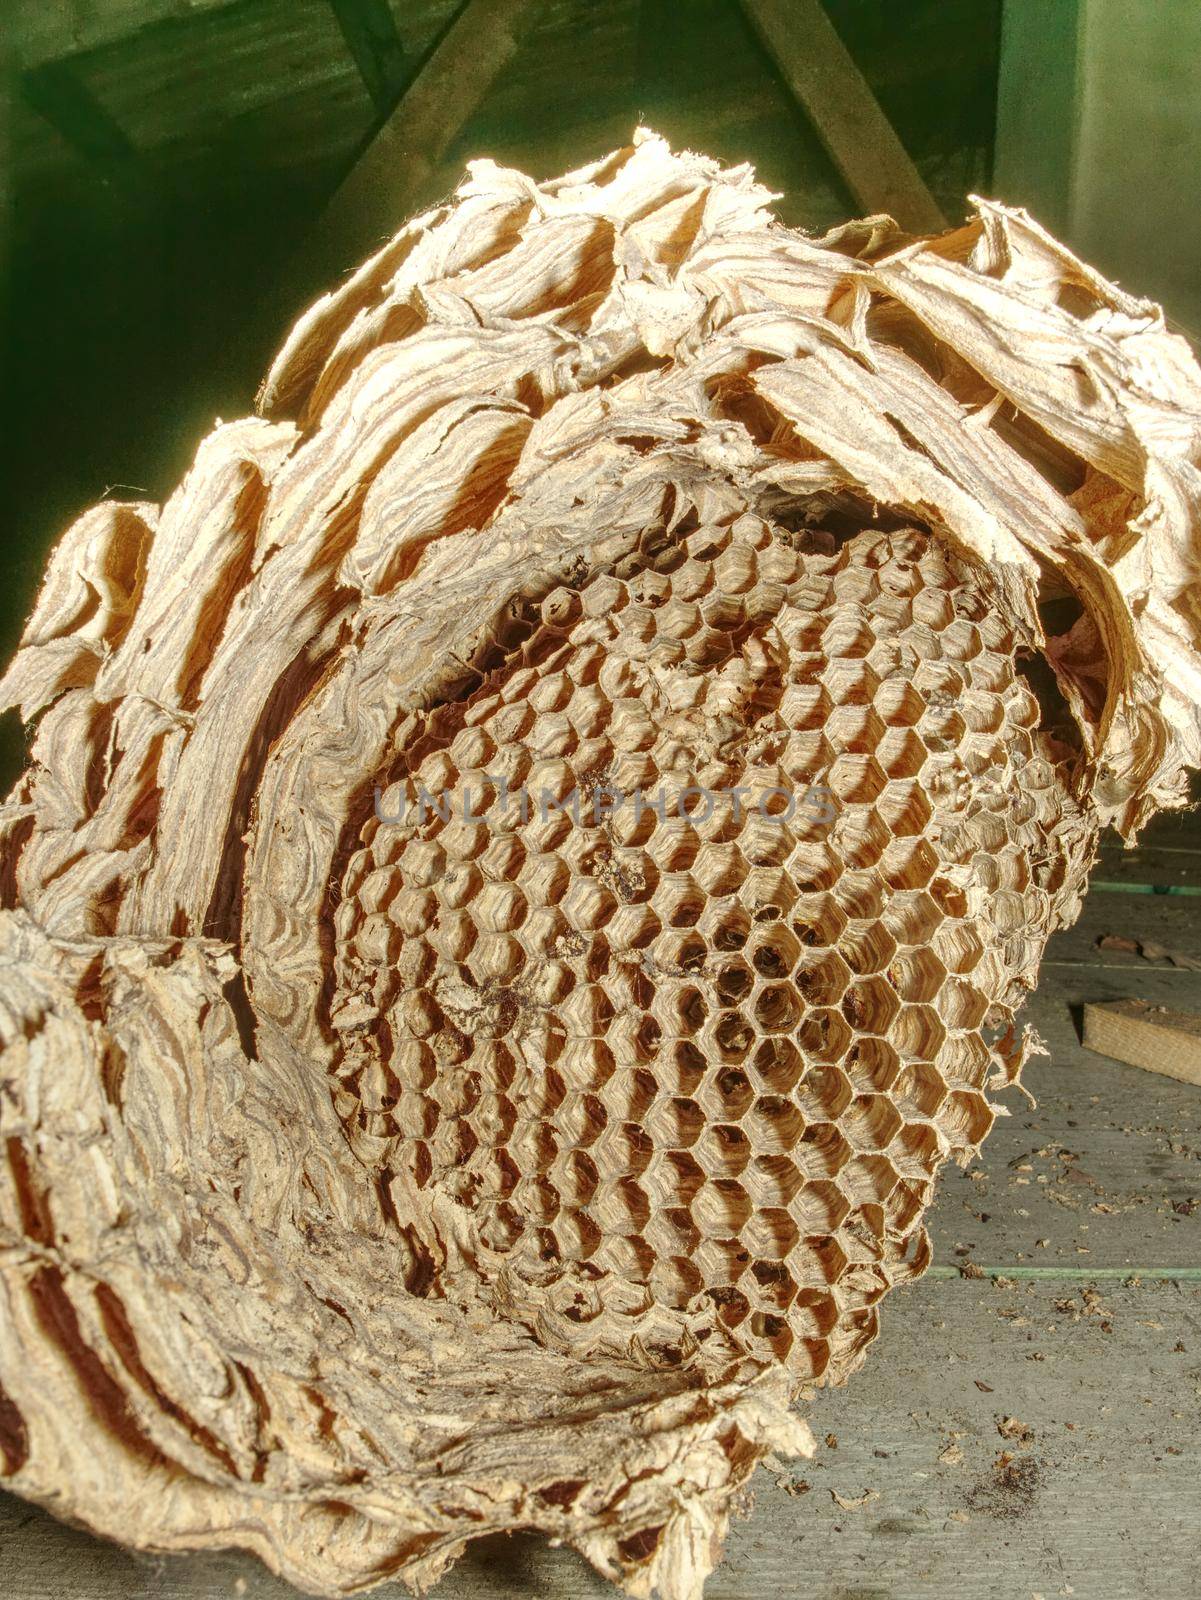 Abandoned european wasp nest in garden house. Wasp built paper nest under house roof.